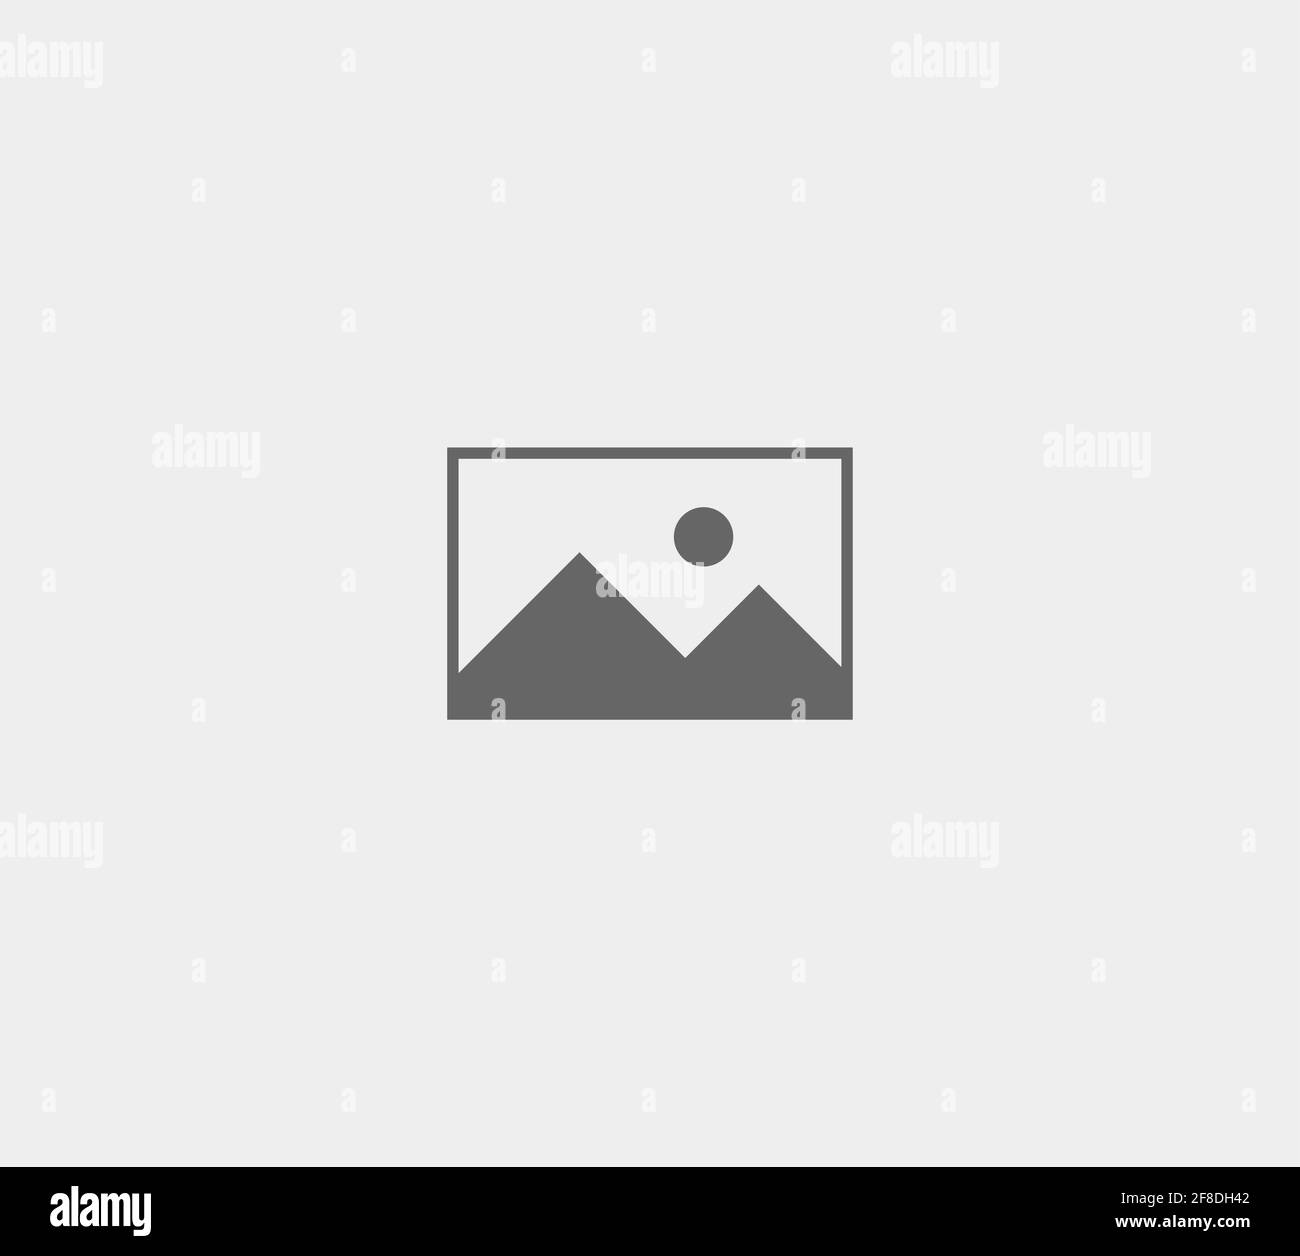 No photo or blank image icon. Loading images or missing image mark. Image not available or image coming soon sign. Simple nature silhouette in frame Stock Vector